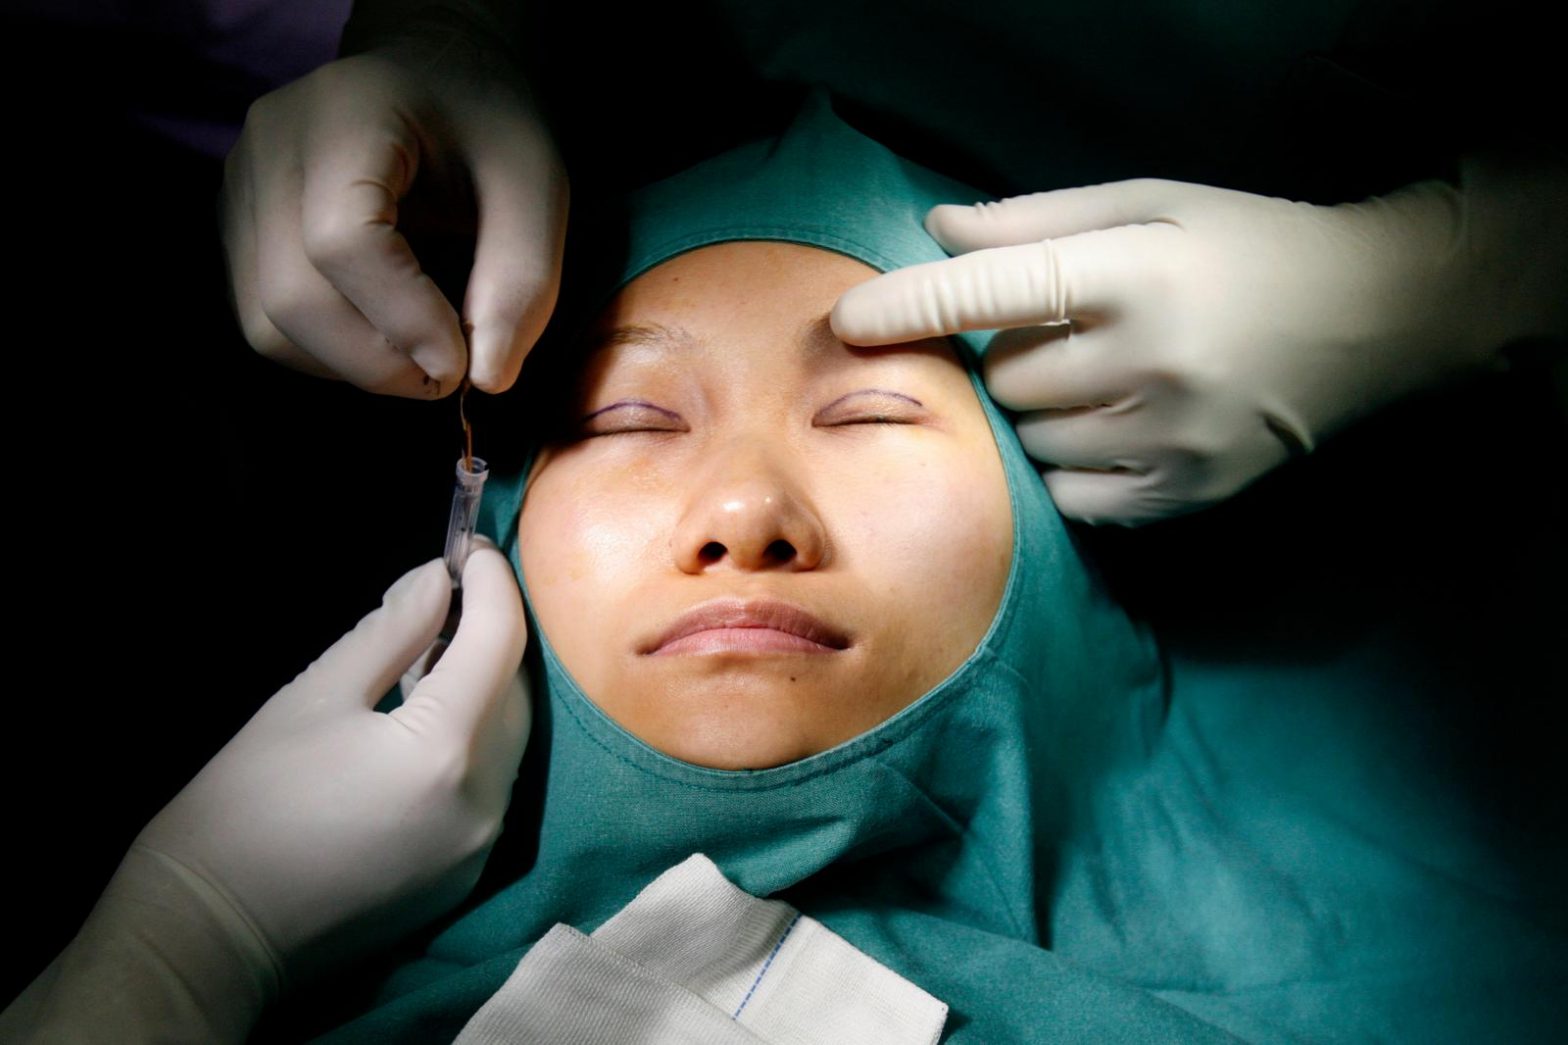 Plastic surgery clients are getting younger—and doctors say selfies are to blame